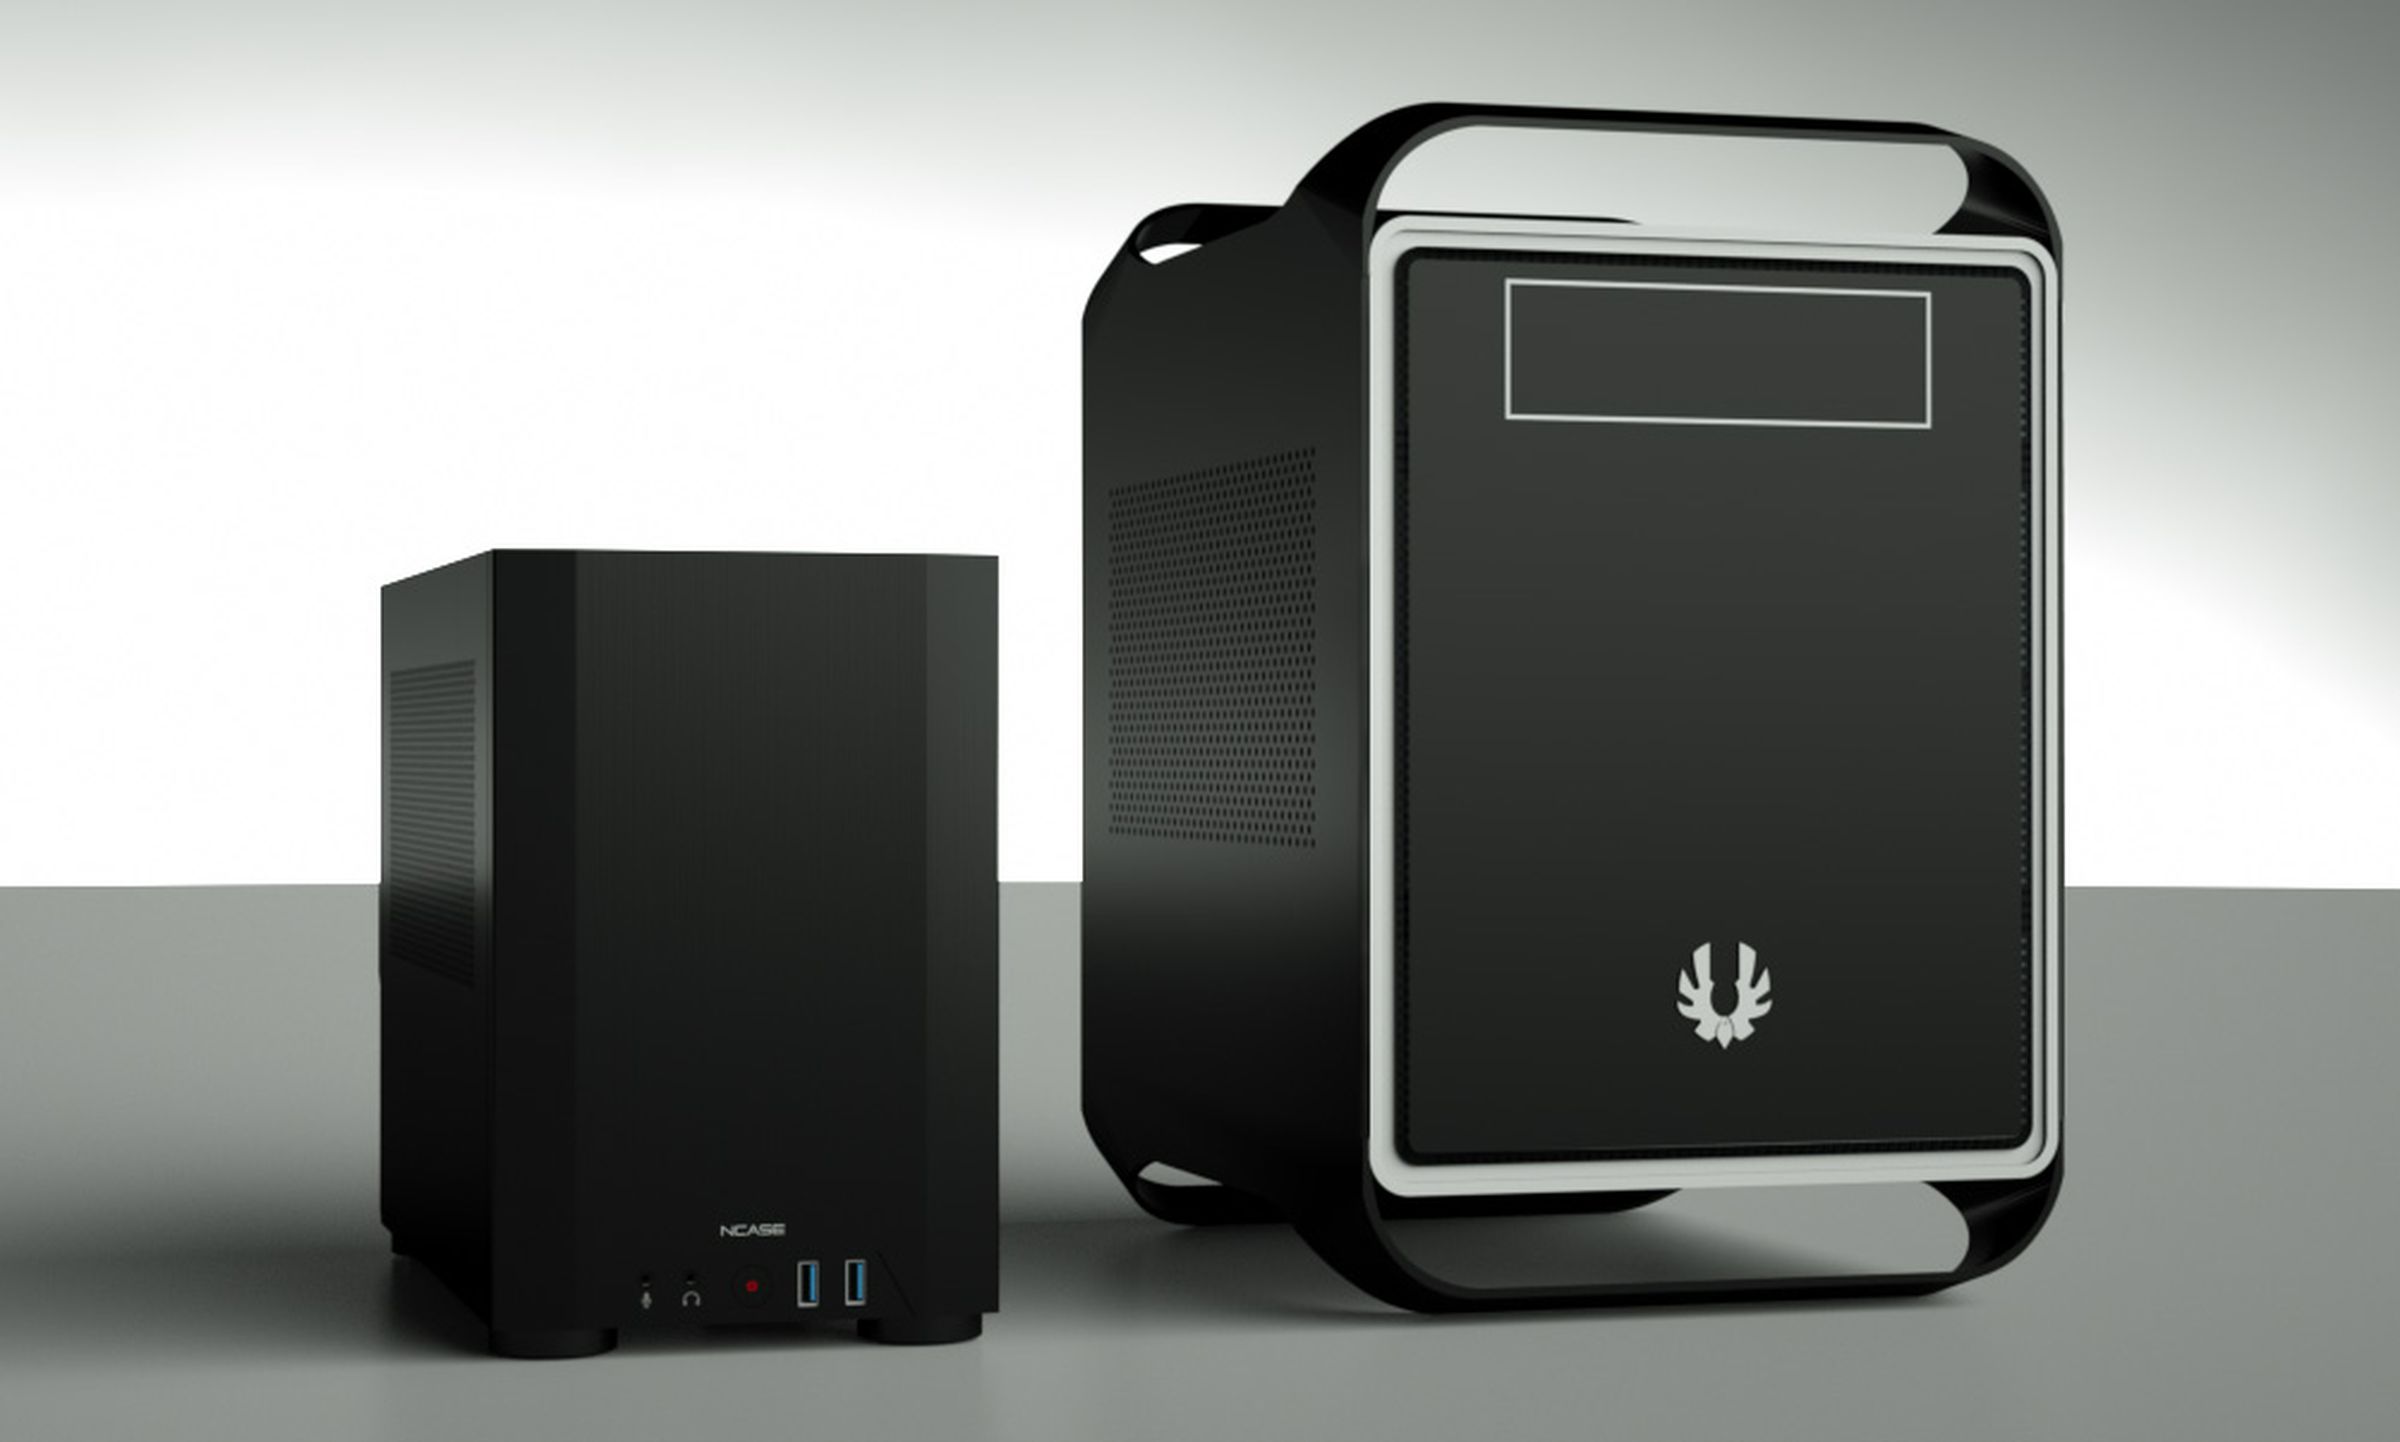 To think the comparatively gigantic BitFenix Prodigy (right) was considered a groundbreaking Mini-ITX case in 2012. 